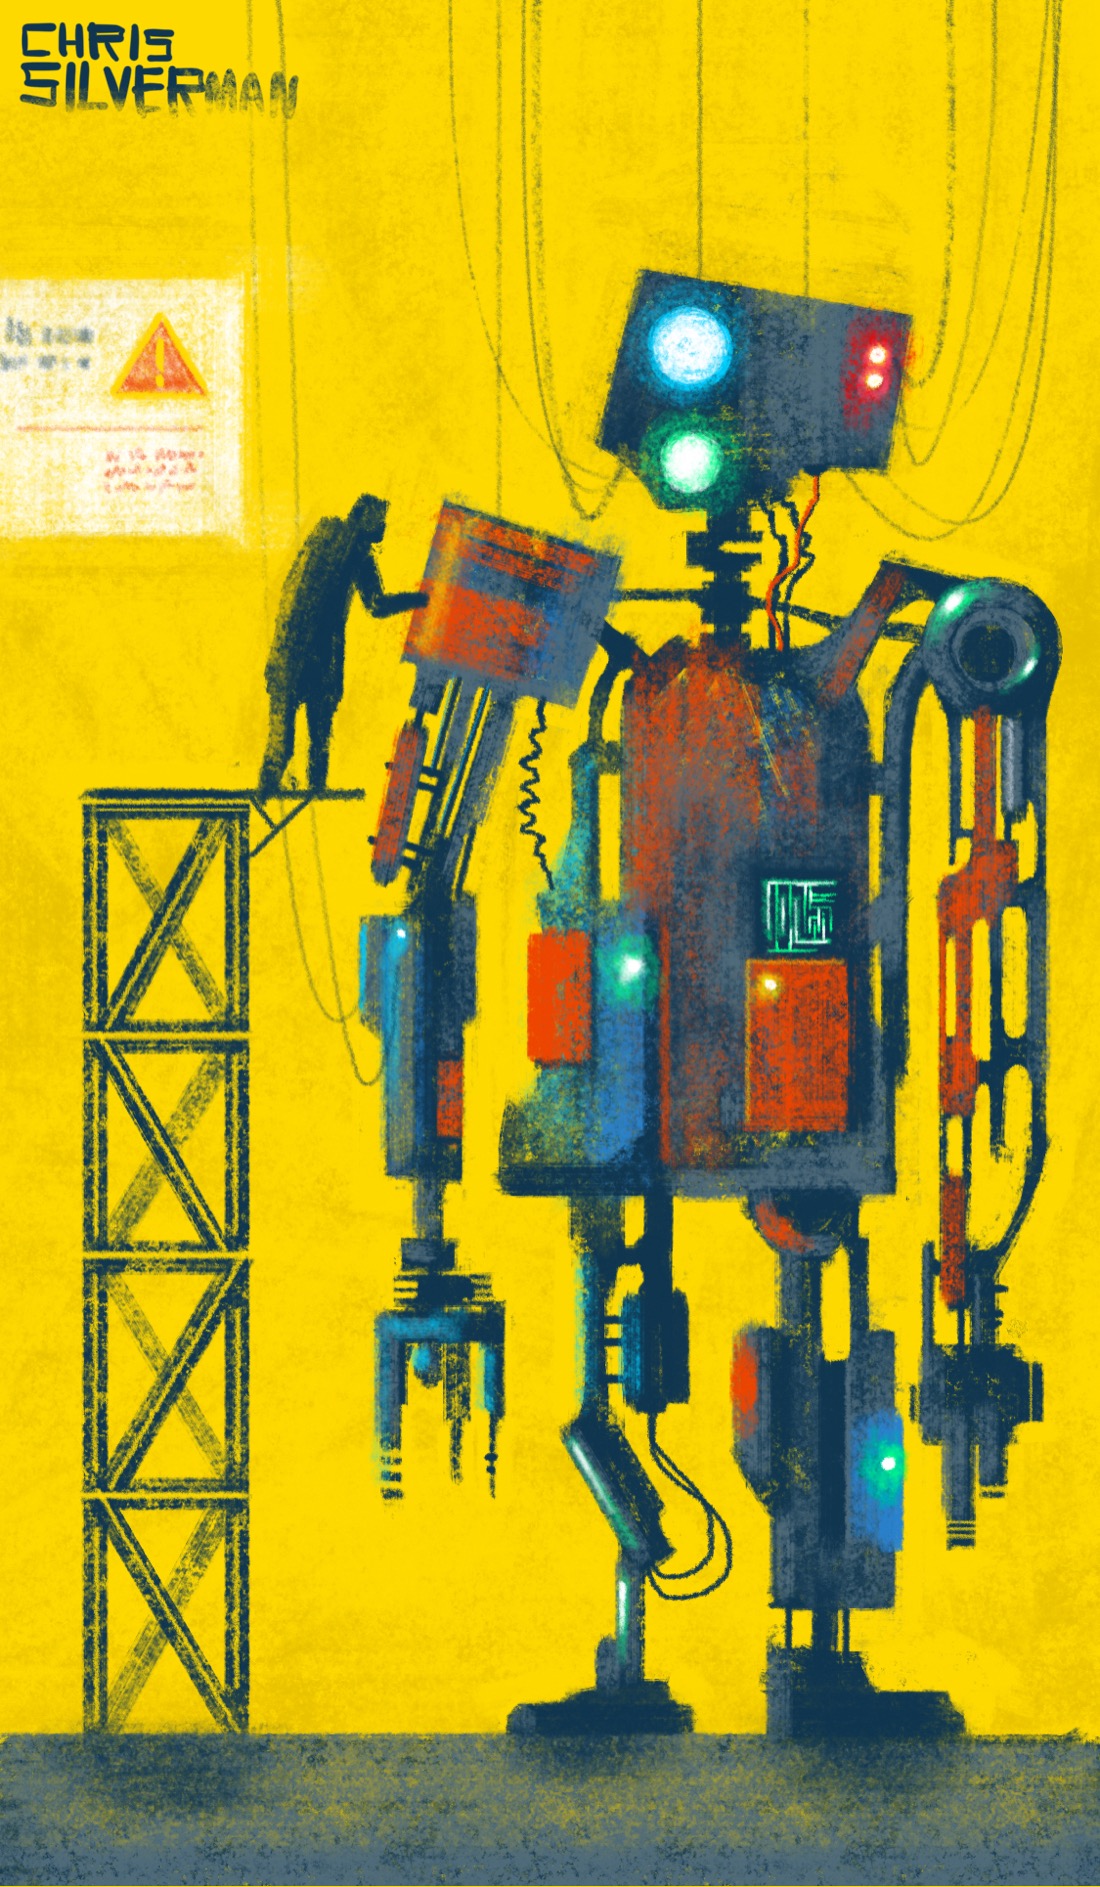 A large, haphazardly constructed robot, about the size of a two to three-story building, standing in what looks like a large laboratory or warehouse. The robot is mostly black, with tinges of blue, red, and gray. Its head has several brightly colored lights. It is a humanoid combination of a number of complex shapes, wires, and lights. Various wires connect it to the ceiling. To the left of it is a tall tower made of scaffolding. At the top of the scaffolding stands a small figure, inspecting something on the robot's shoulder. The wall behind it is yellow, with what looks like warning signage on the left: indecipherable lettering and a triangular red hazard symbol.